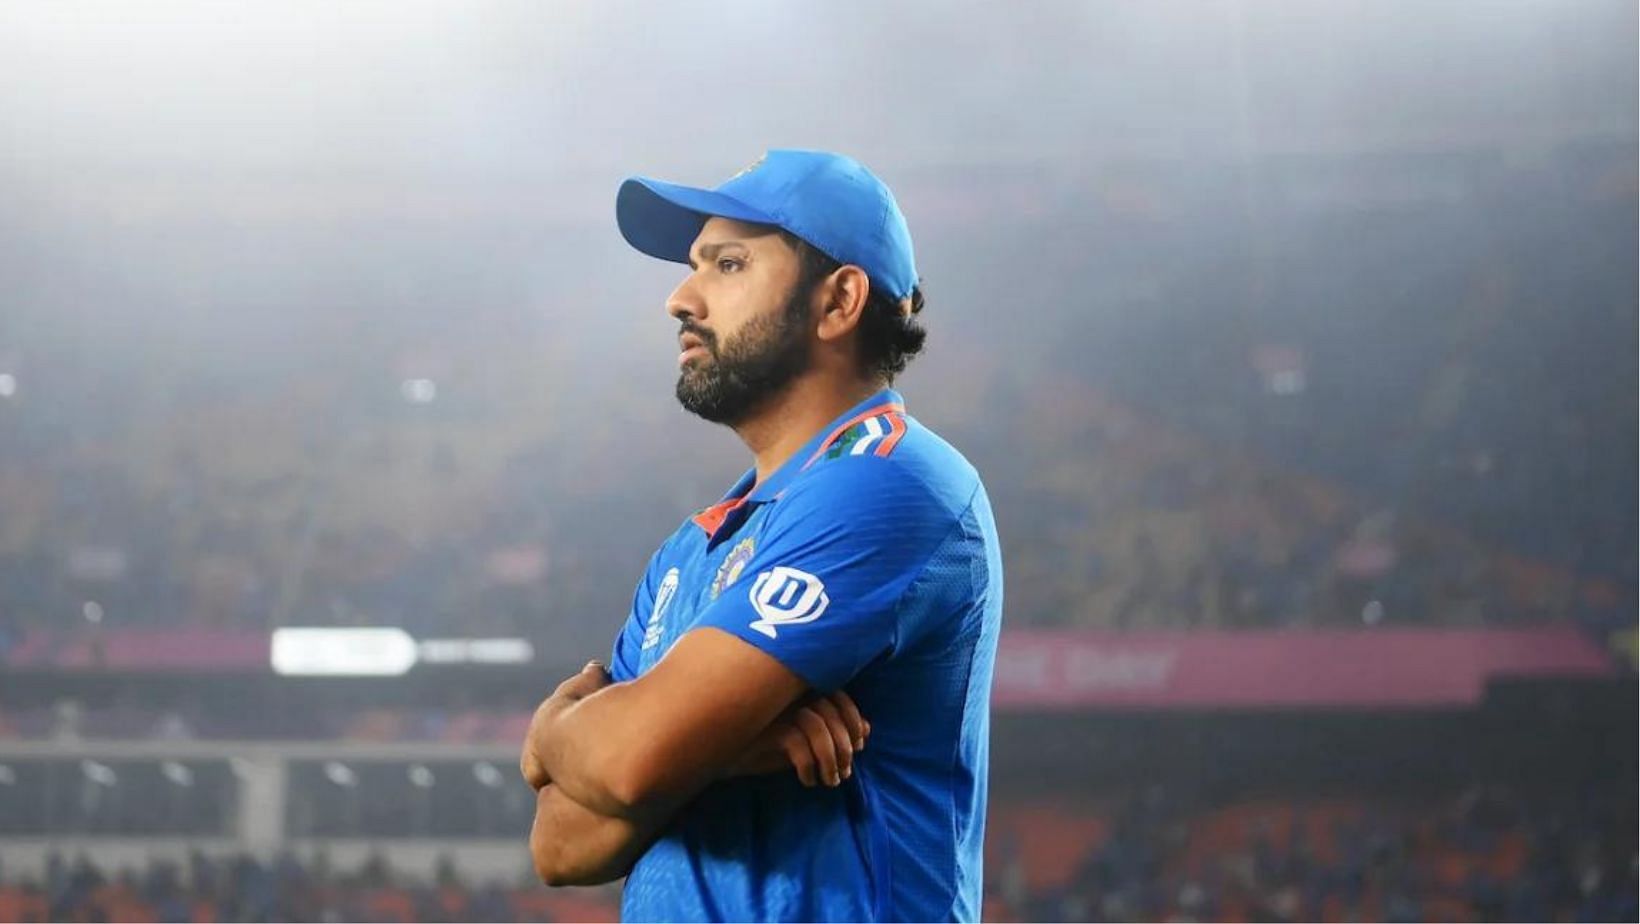 Rohit Sharma could get into the league of legends today.